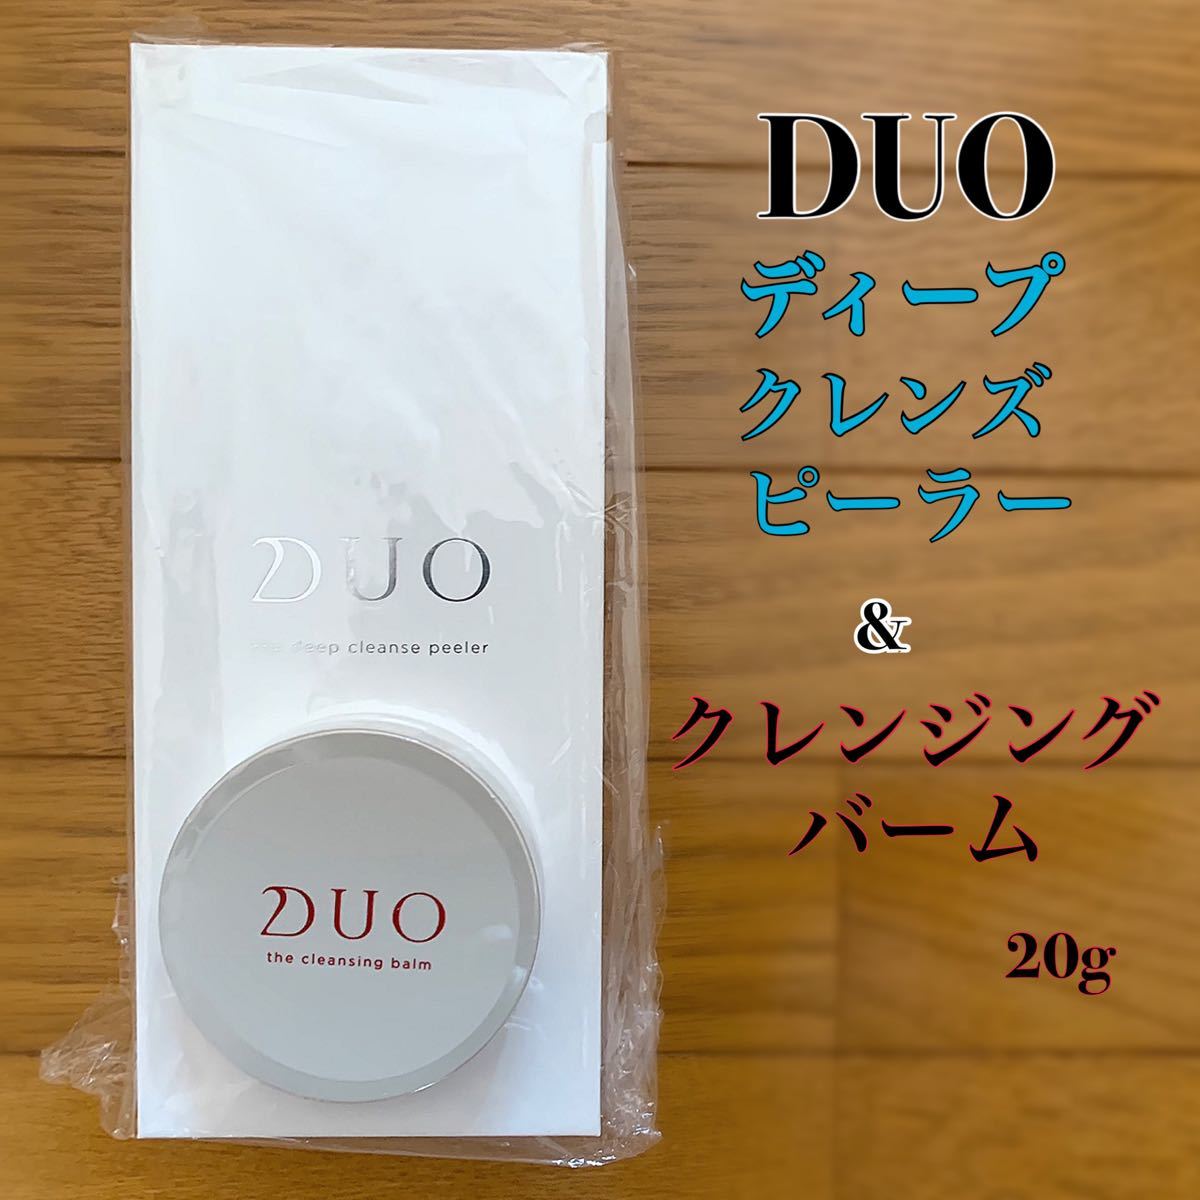 Duo the cleansing balm 20g & ピーラー